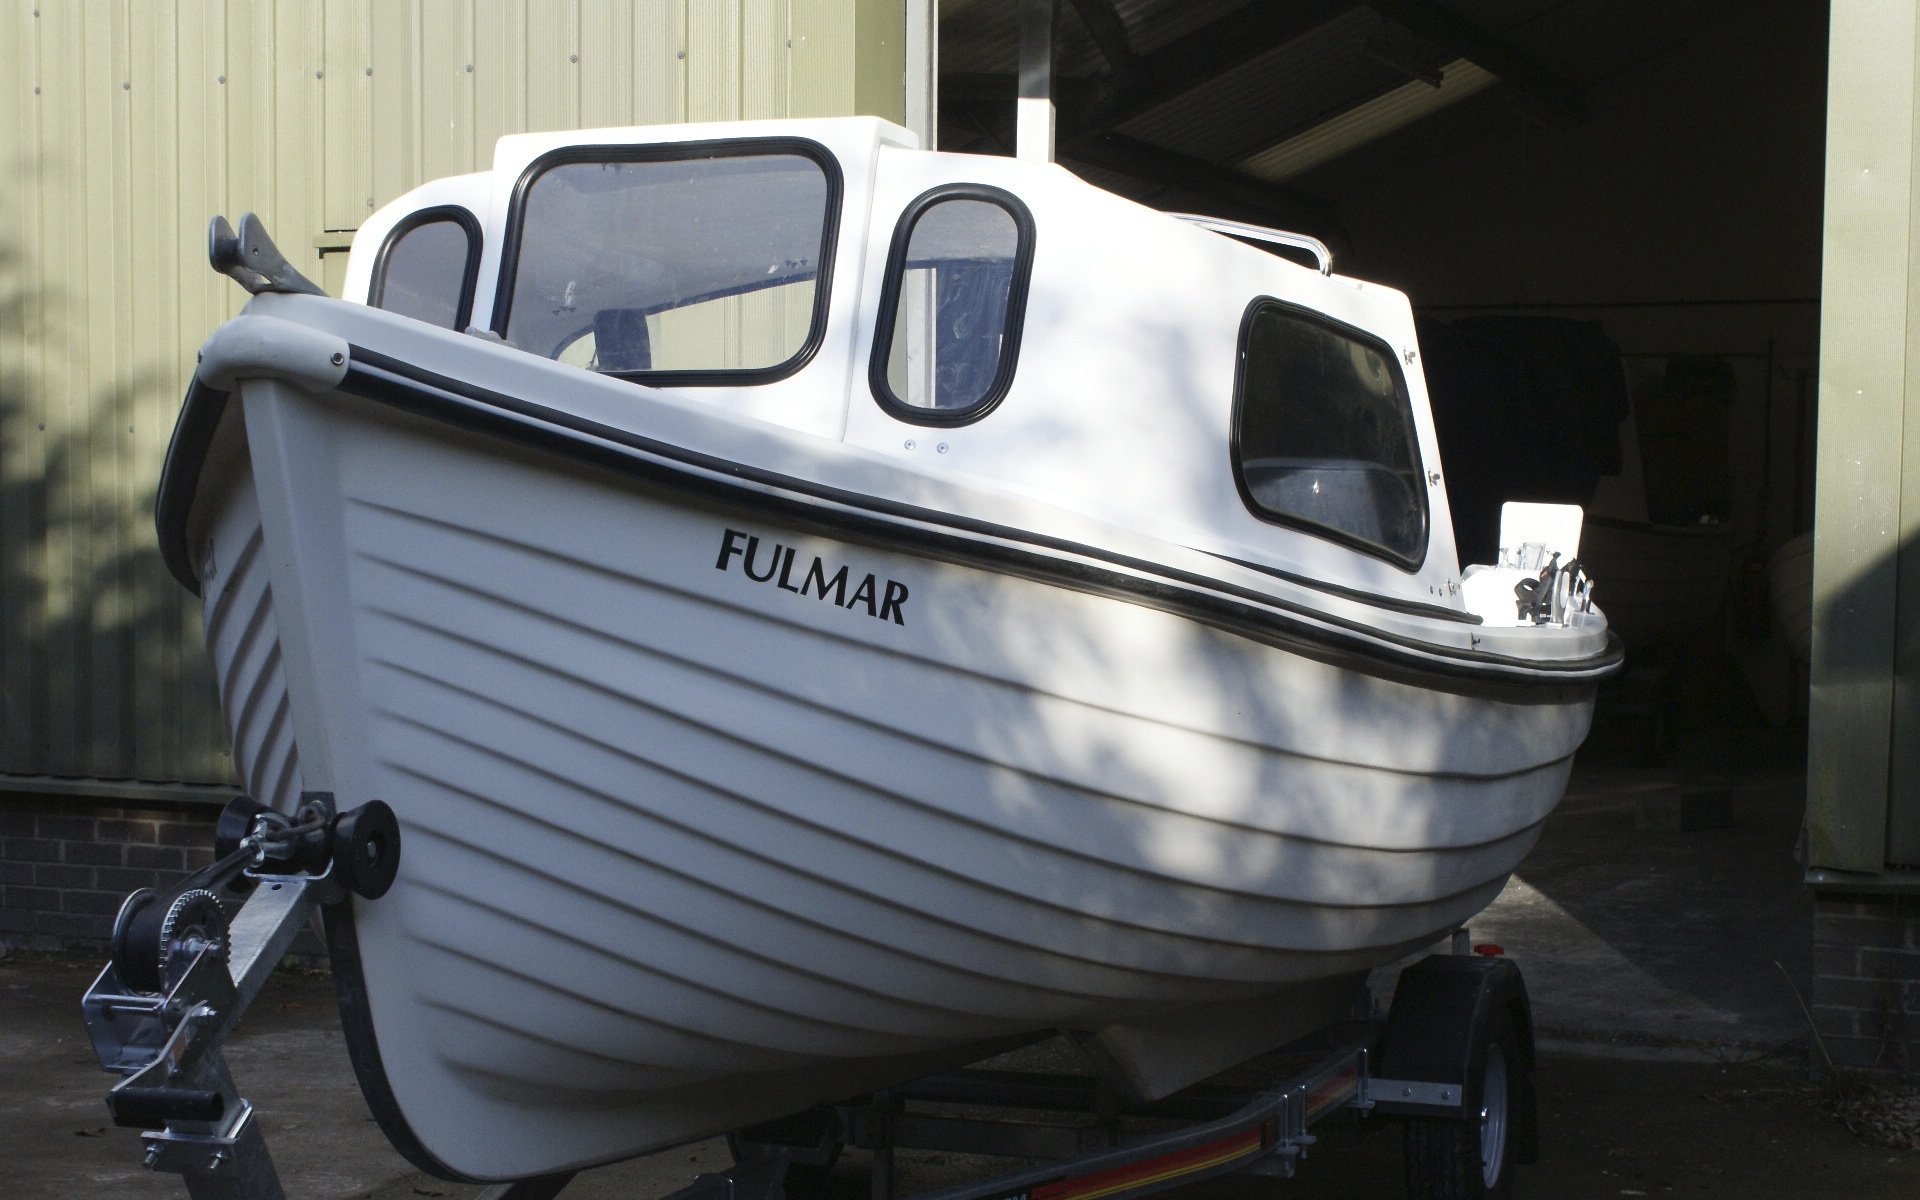 Arran Boat Sales 16' Fishing Boats for Sale Built in Scotland.